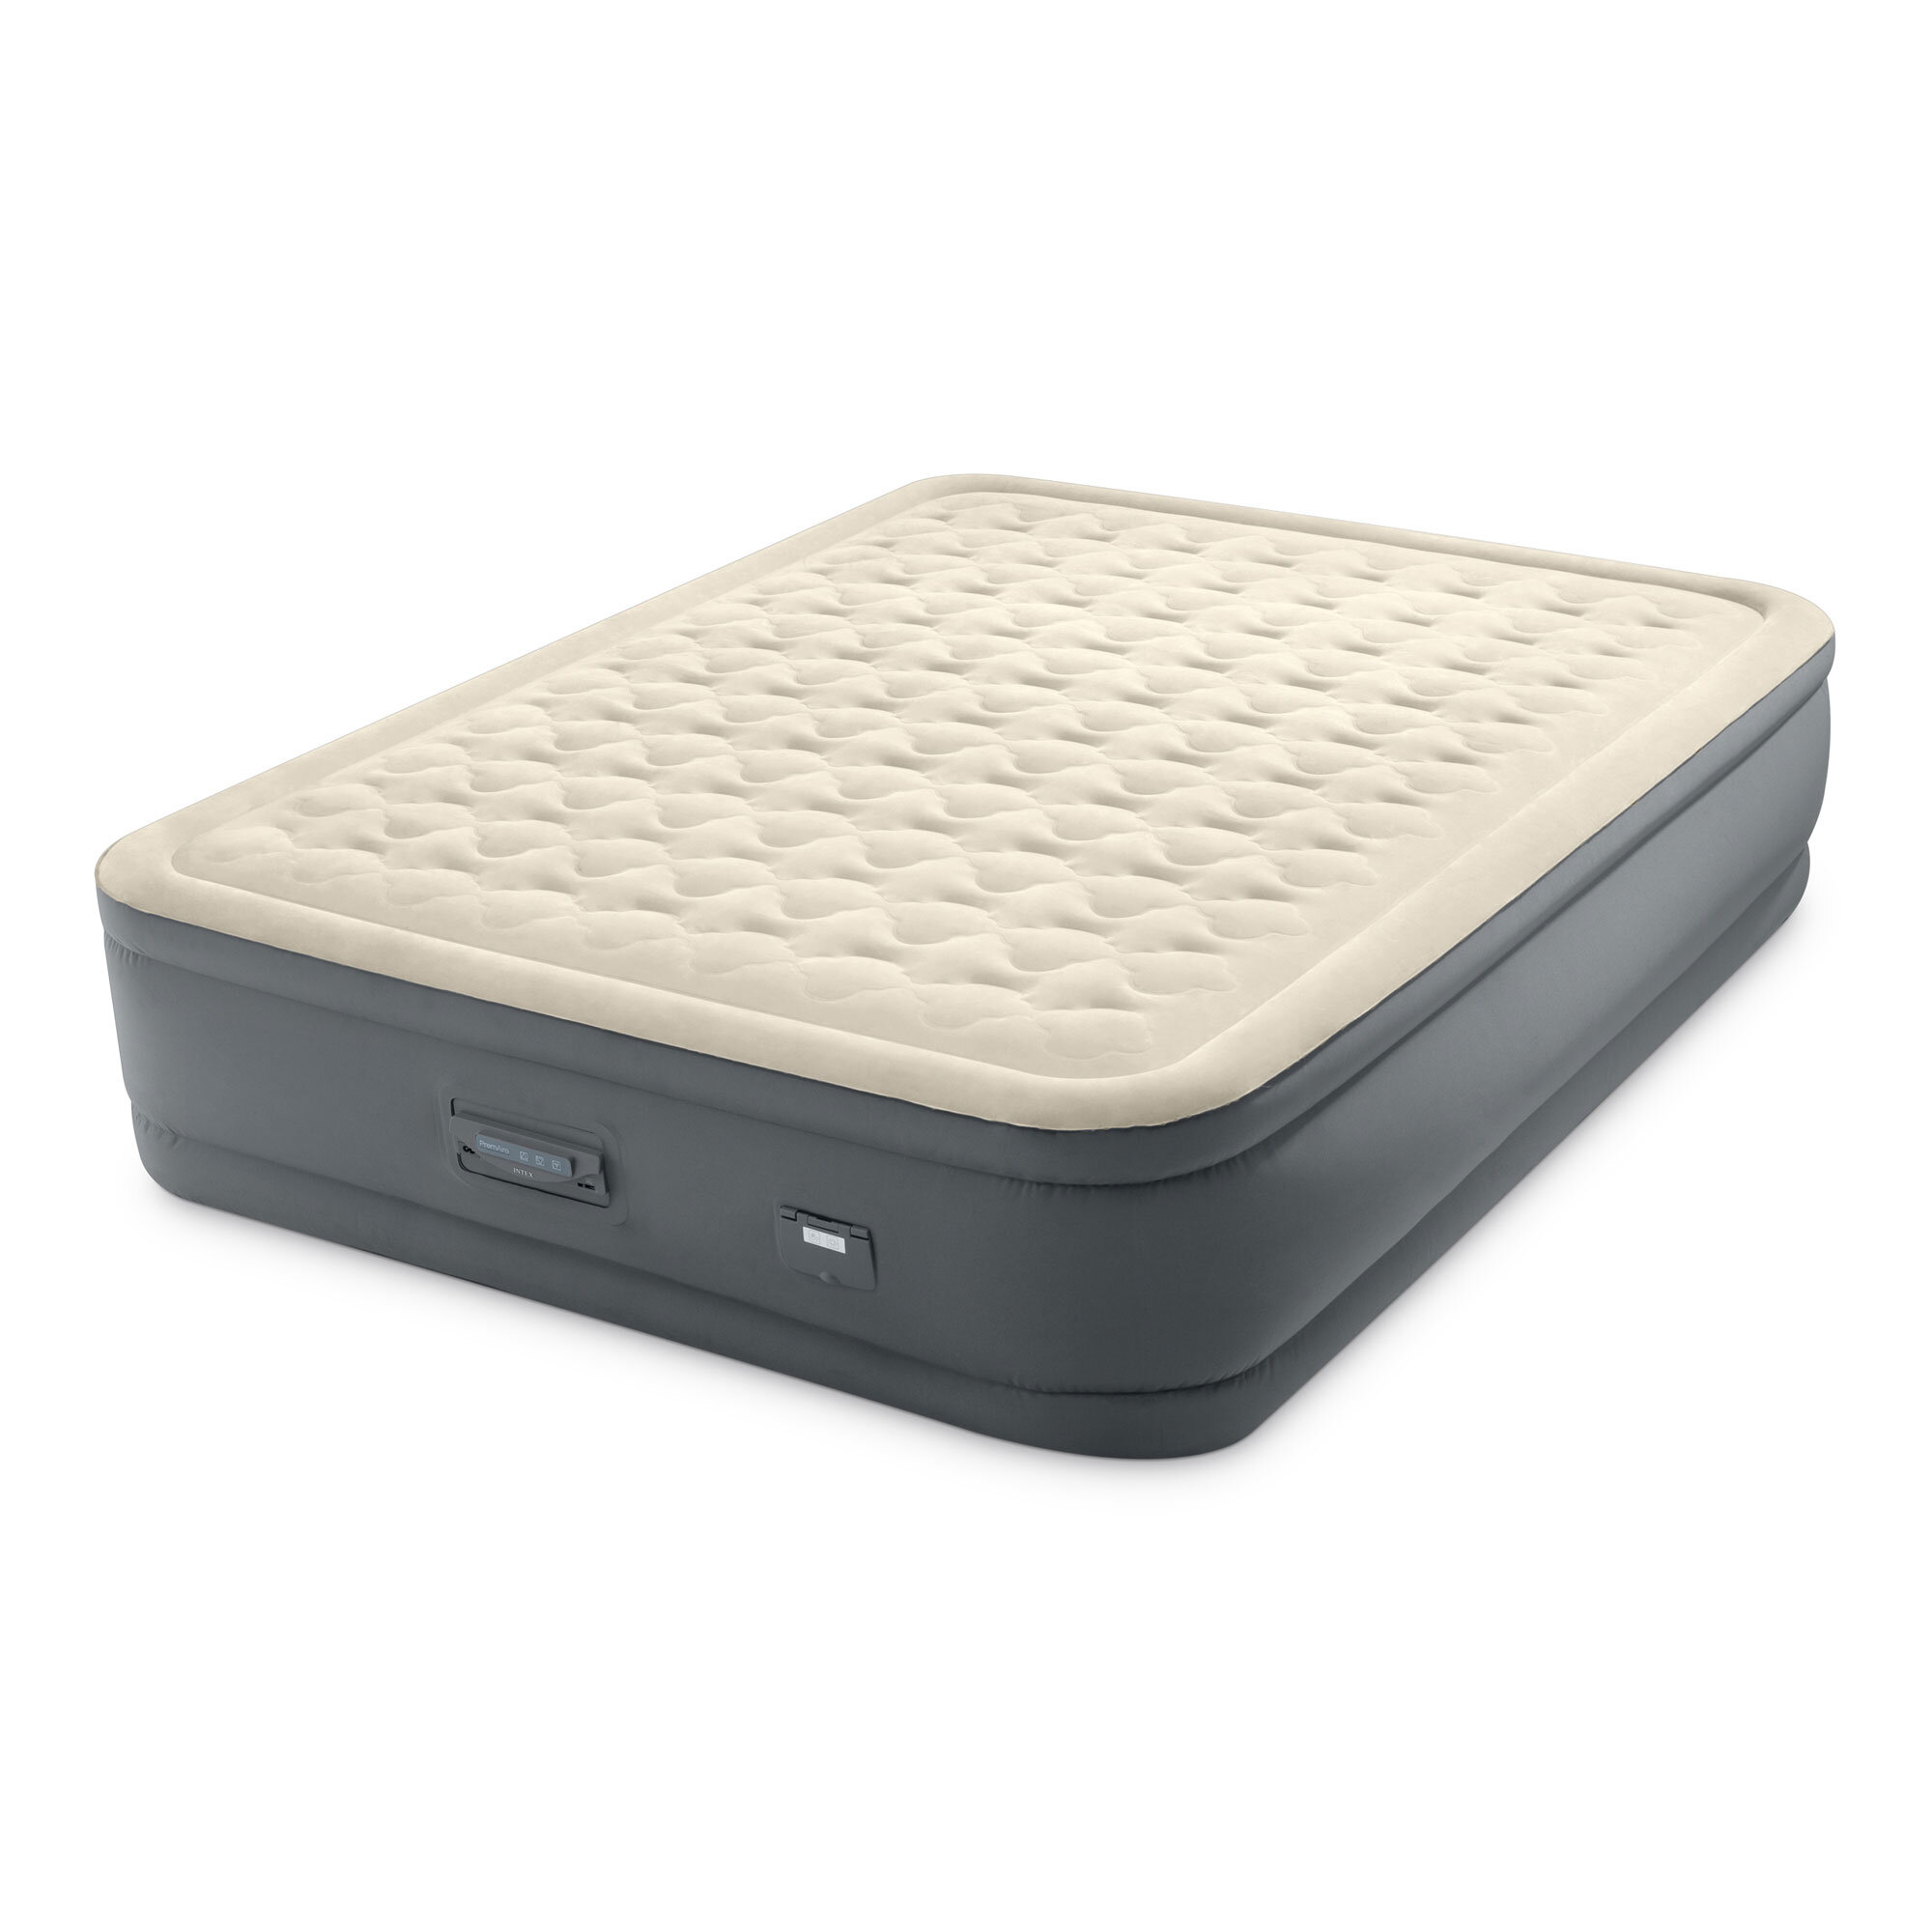 Intex - Matelas gonflable - Comfort-Plush Elevated Queen